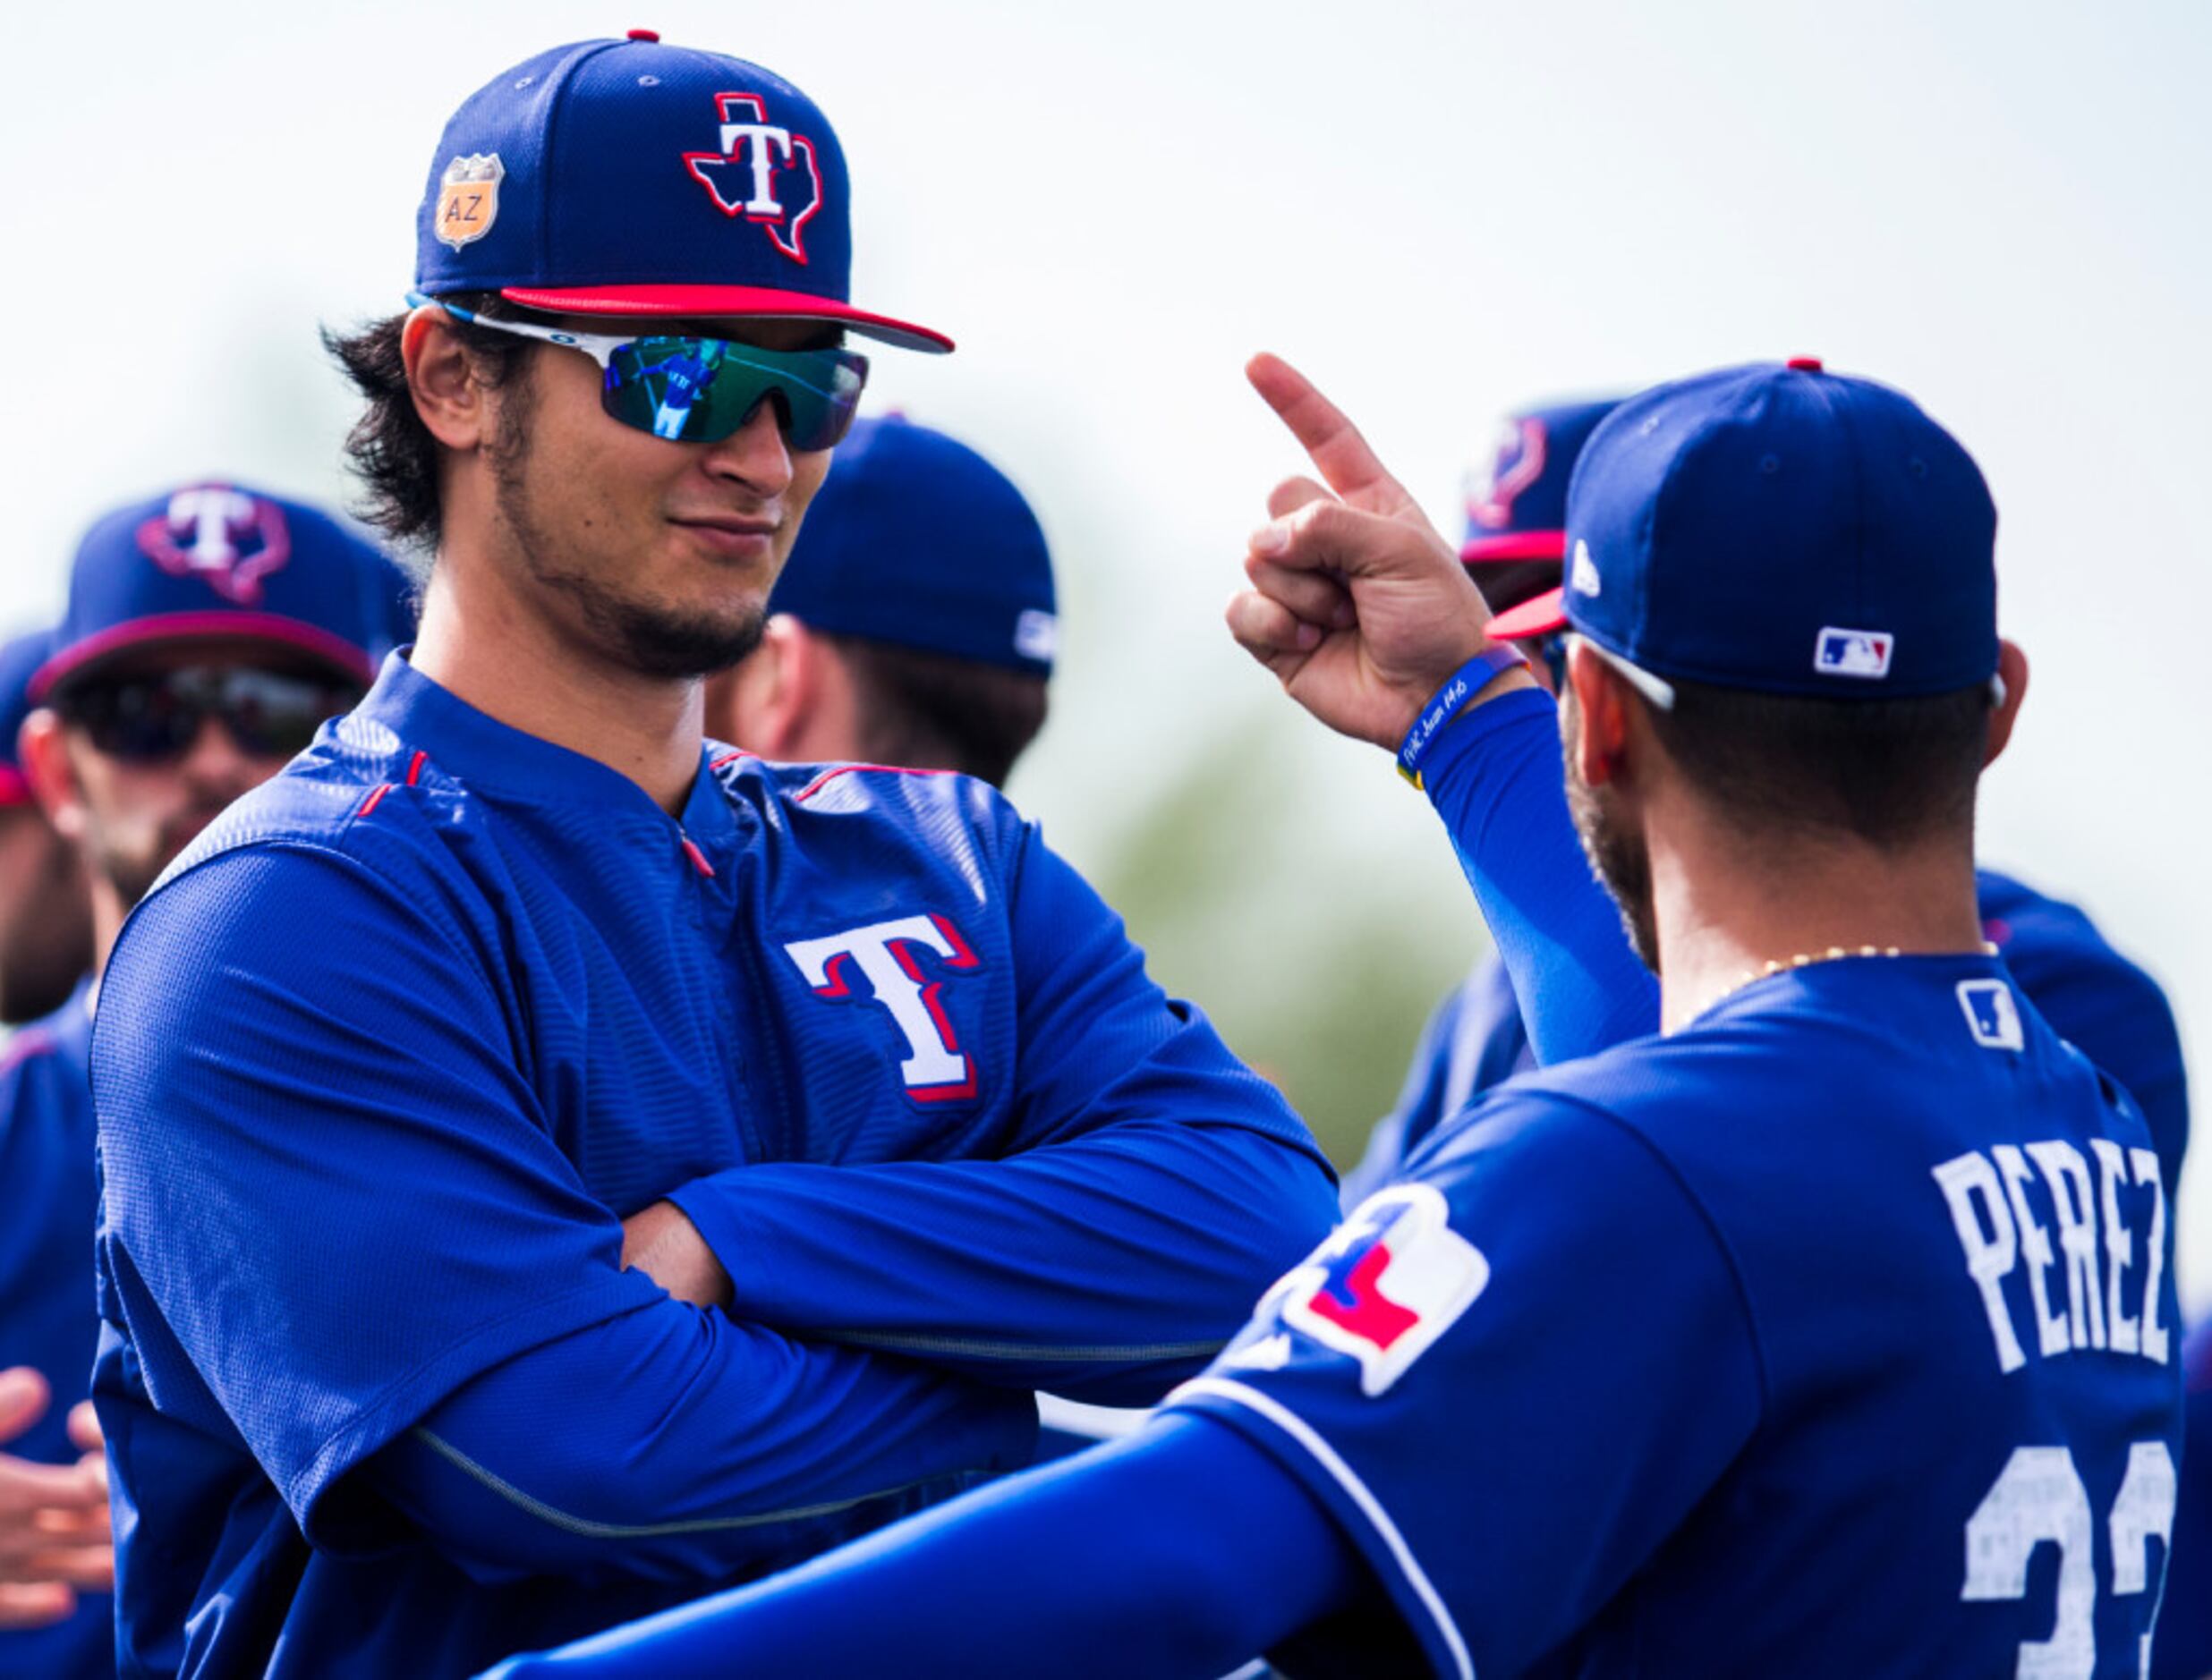 Rangers star Yu Darvish and girlfriend expecting a child